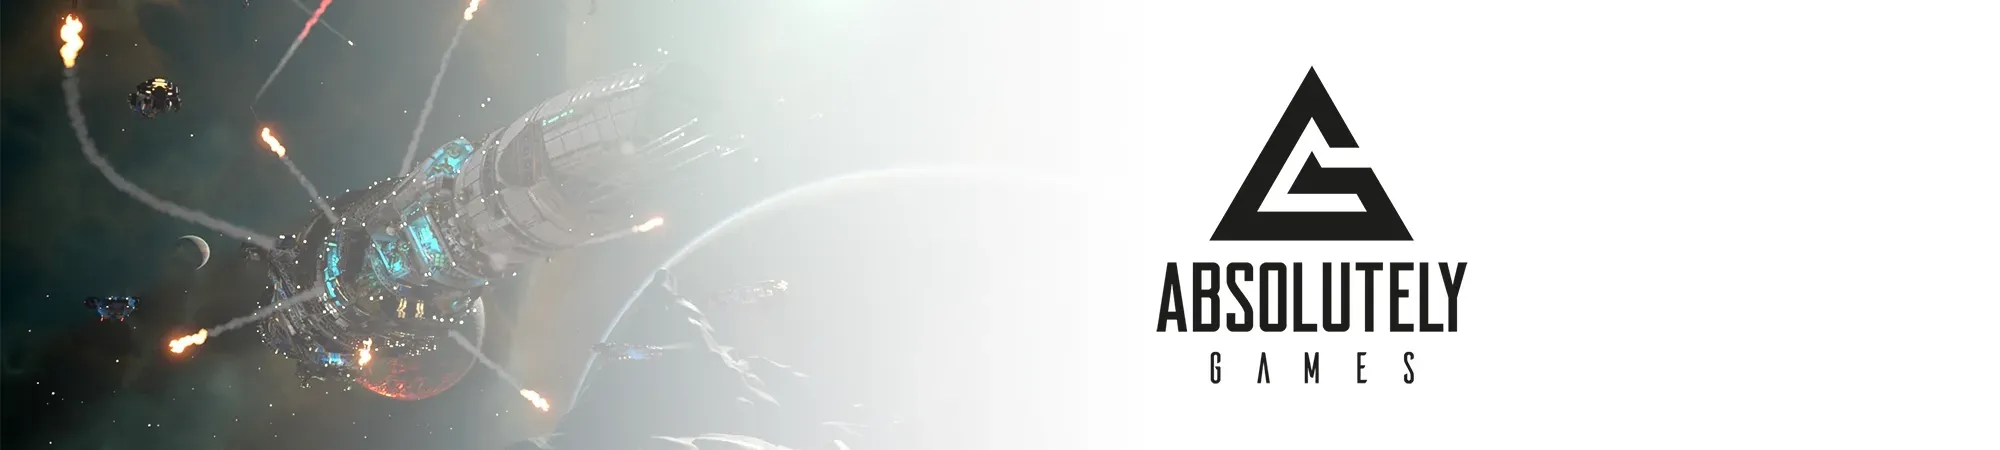 Absolutely Games Banner